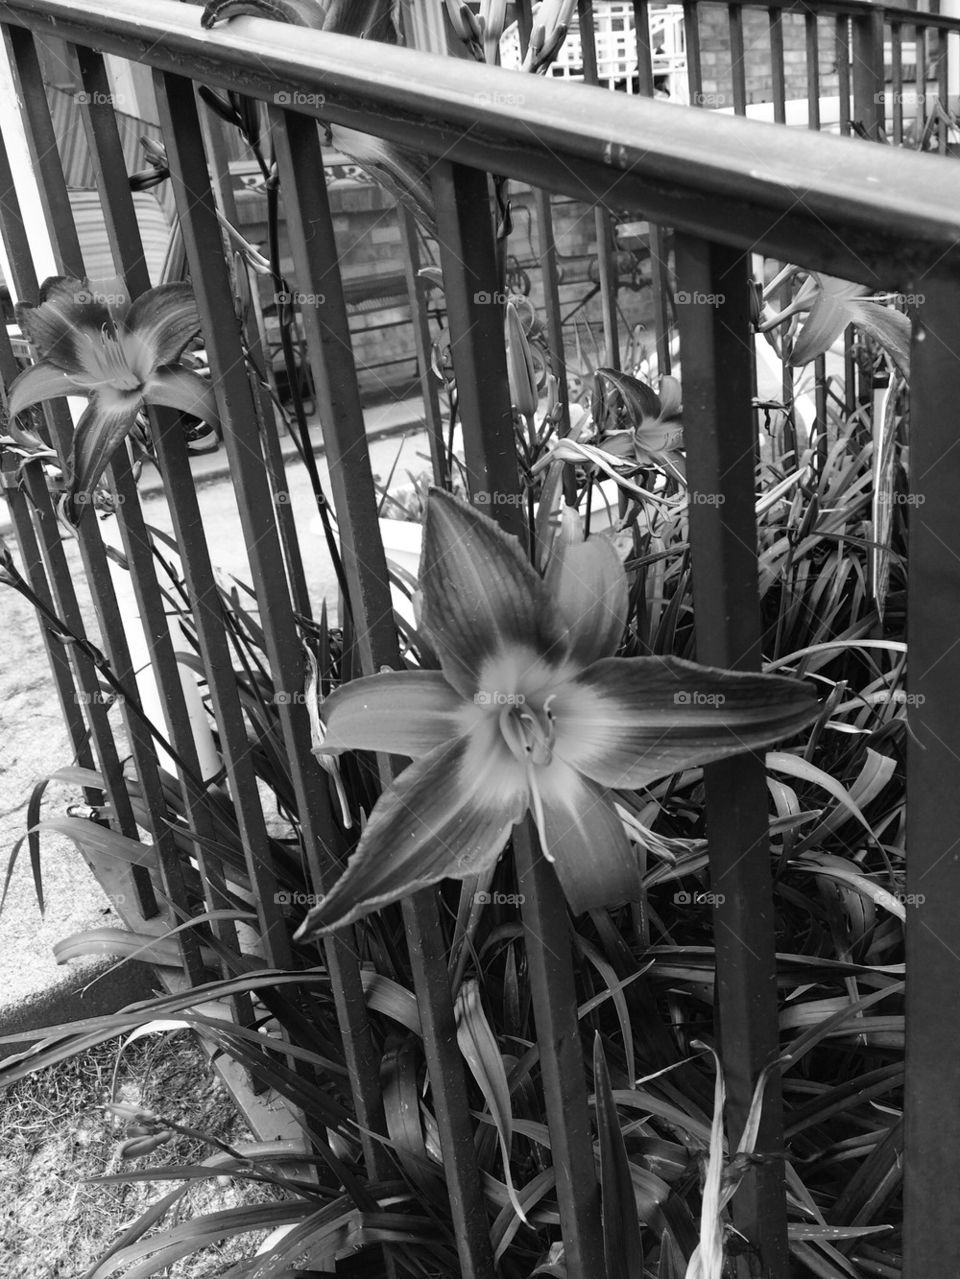 Lilies and Bars